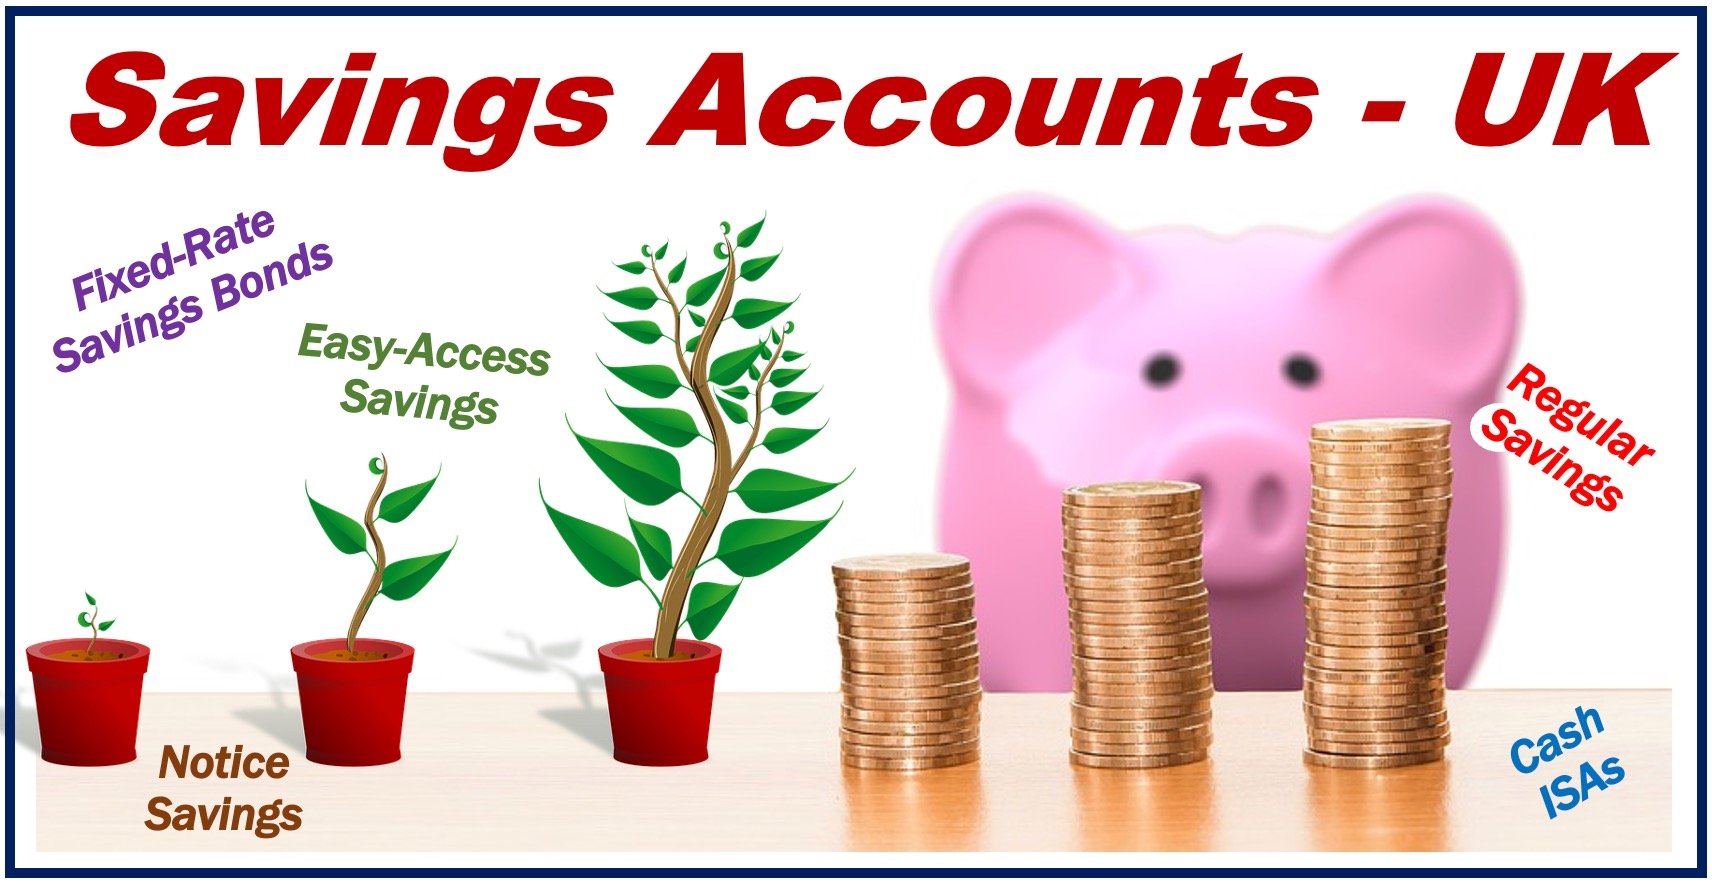 The different savings accounts explained Market Business News